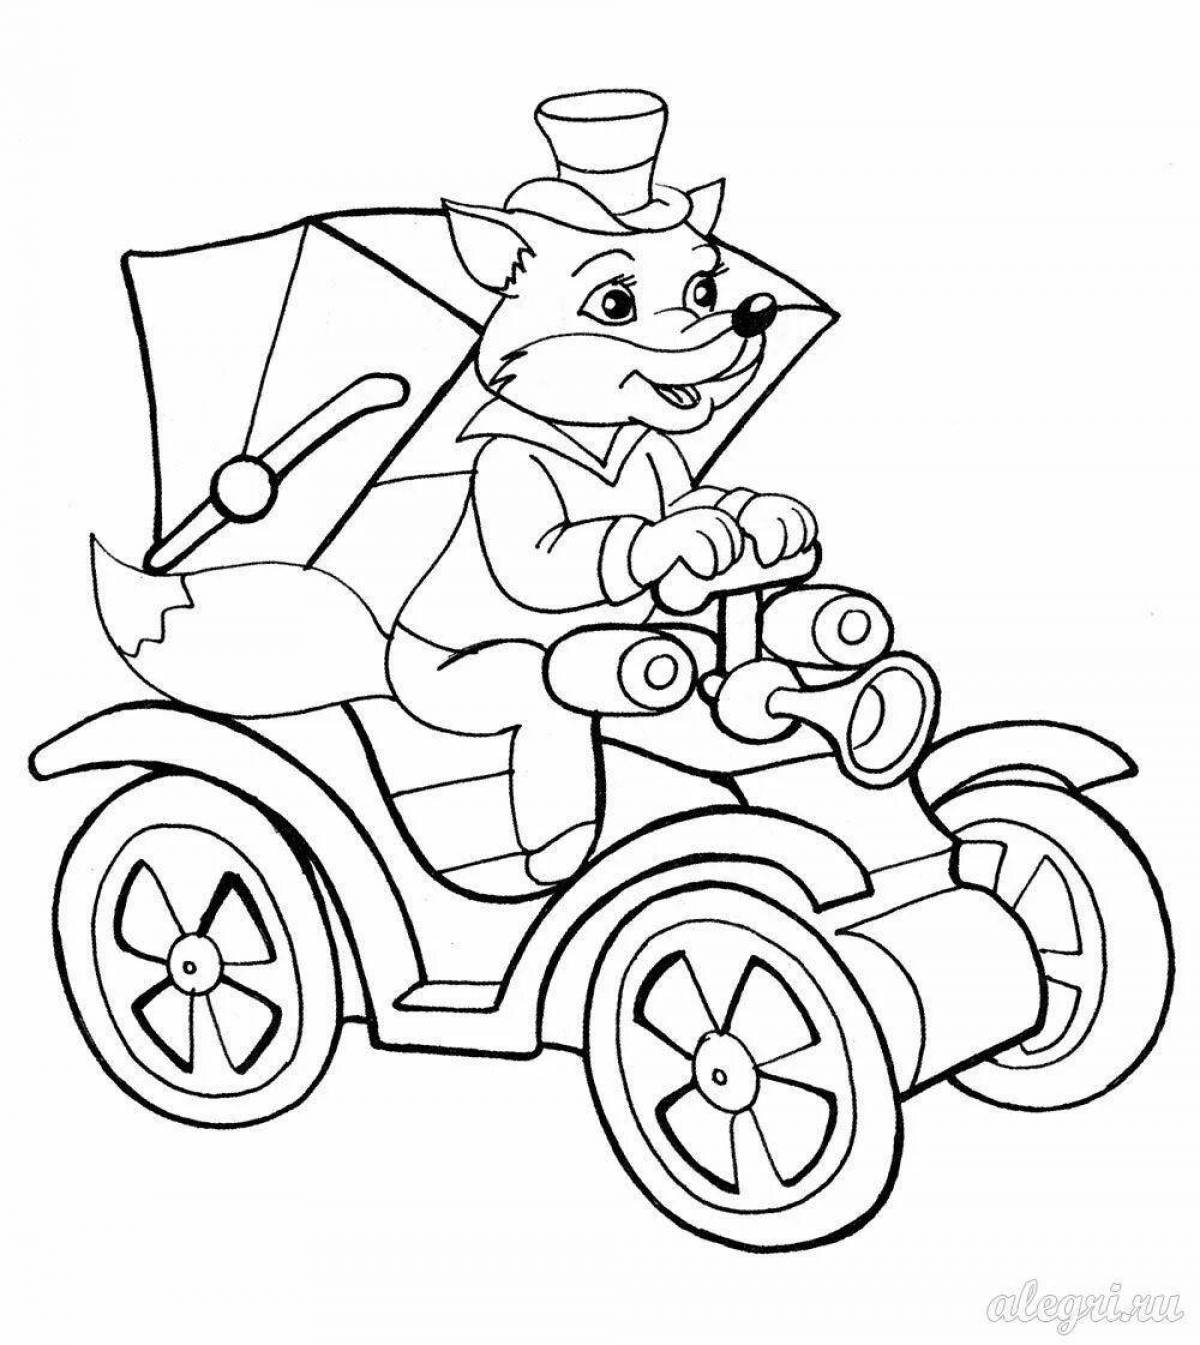 Coloring book clever cunning fox